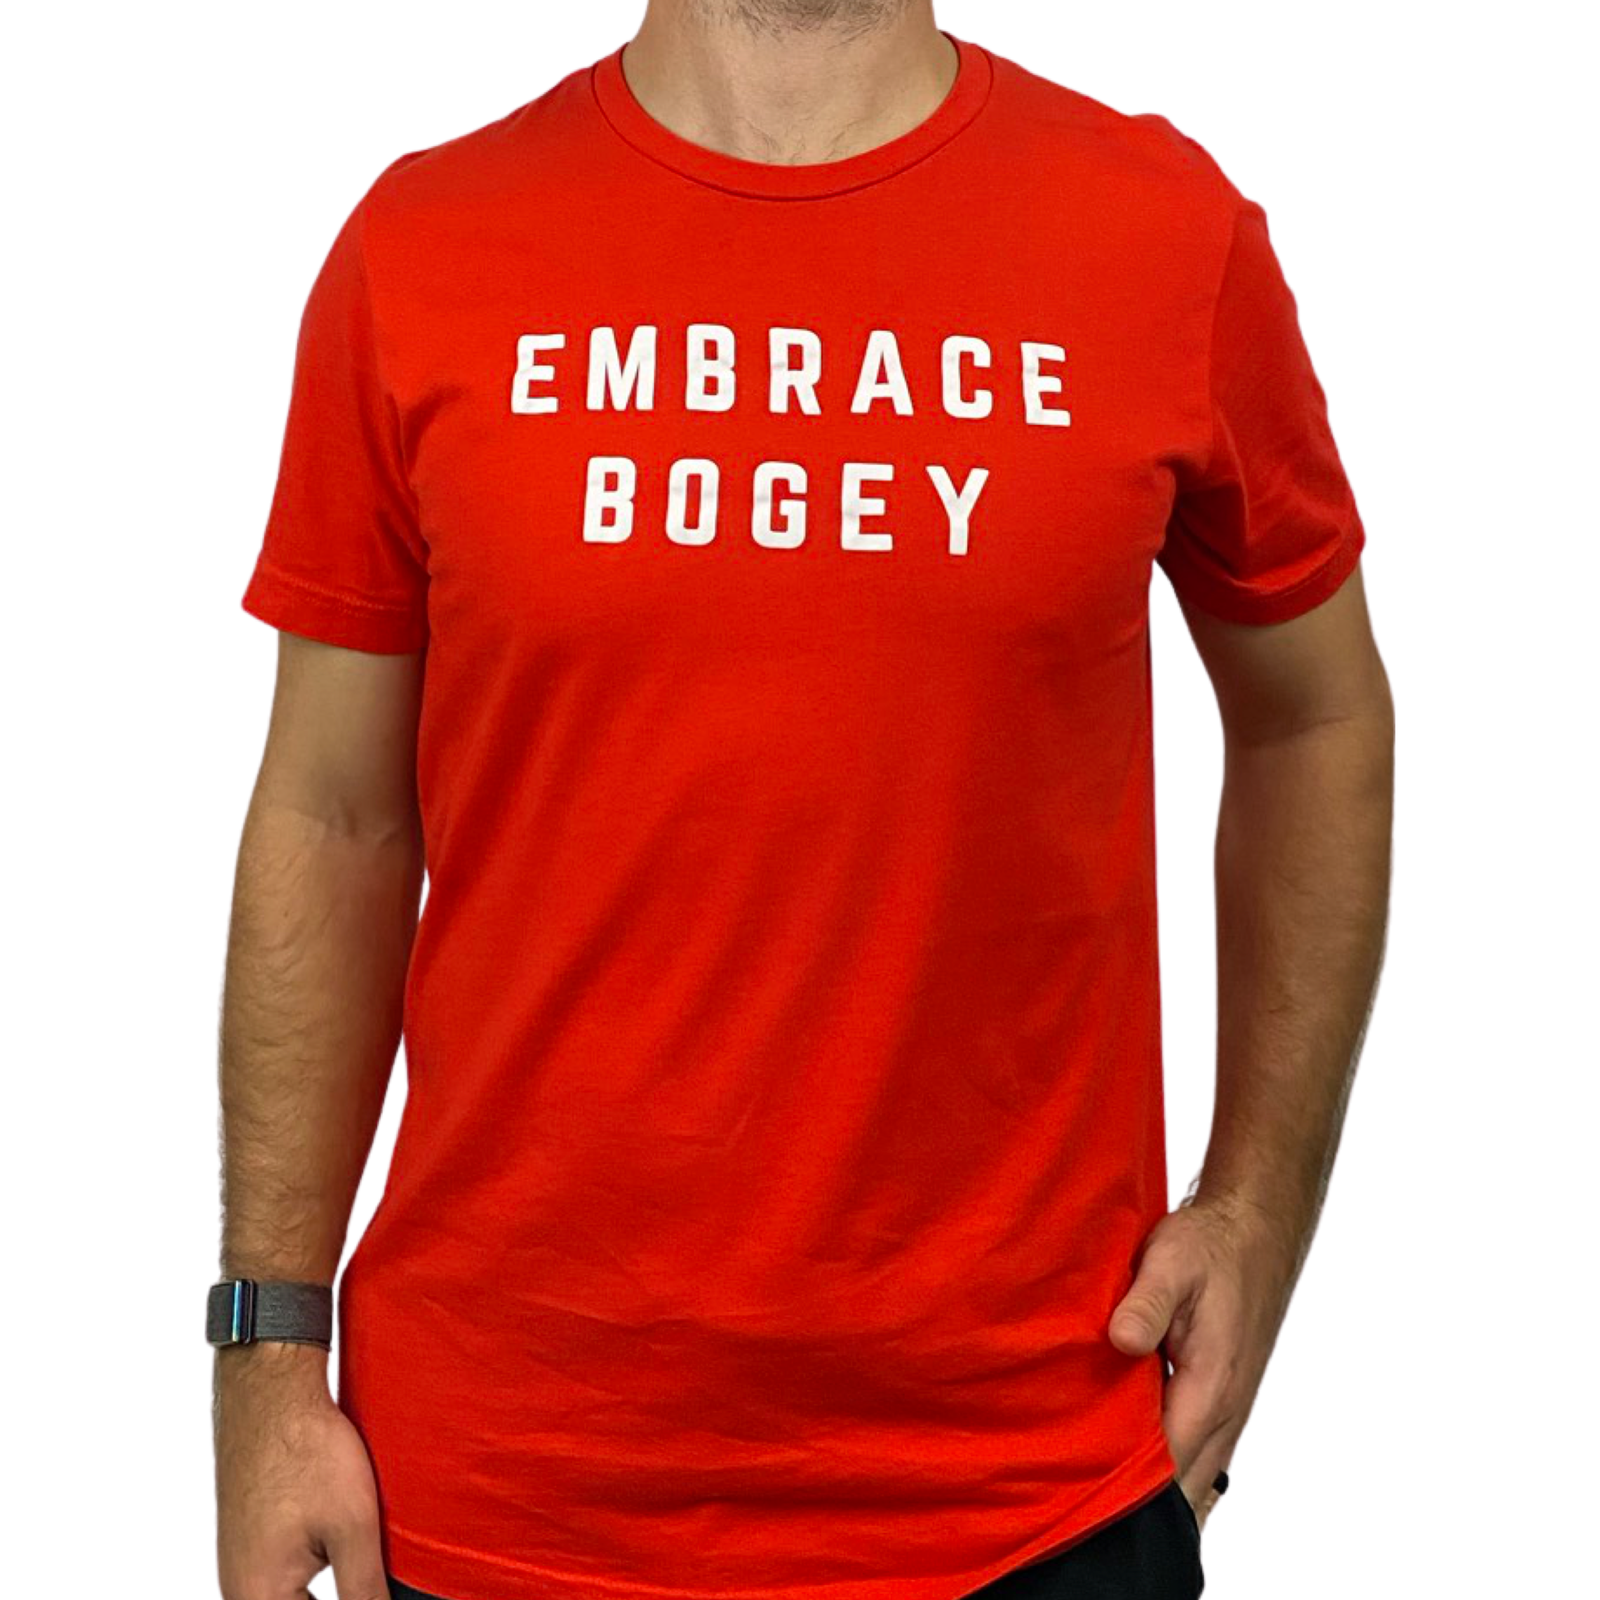 Red colored, 100% cotton t-shirt with the words Embrace Bogey in white lettering.